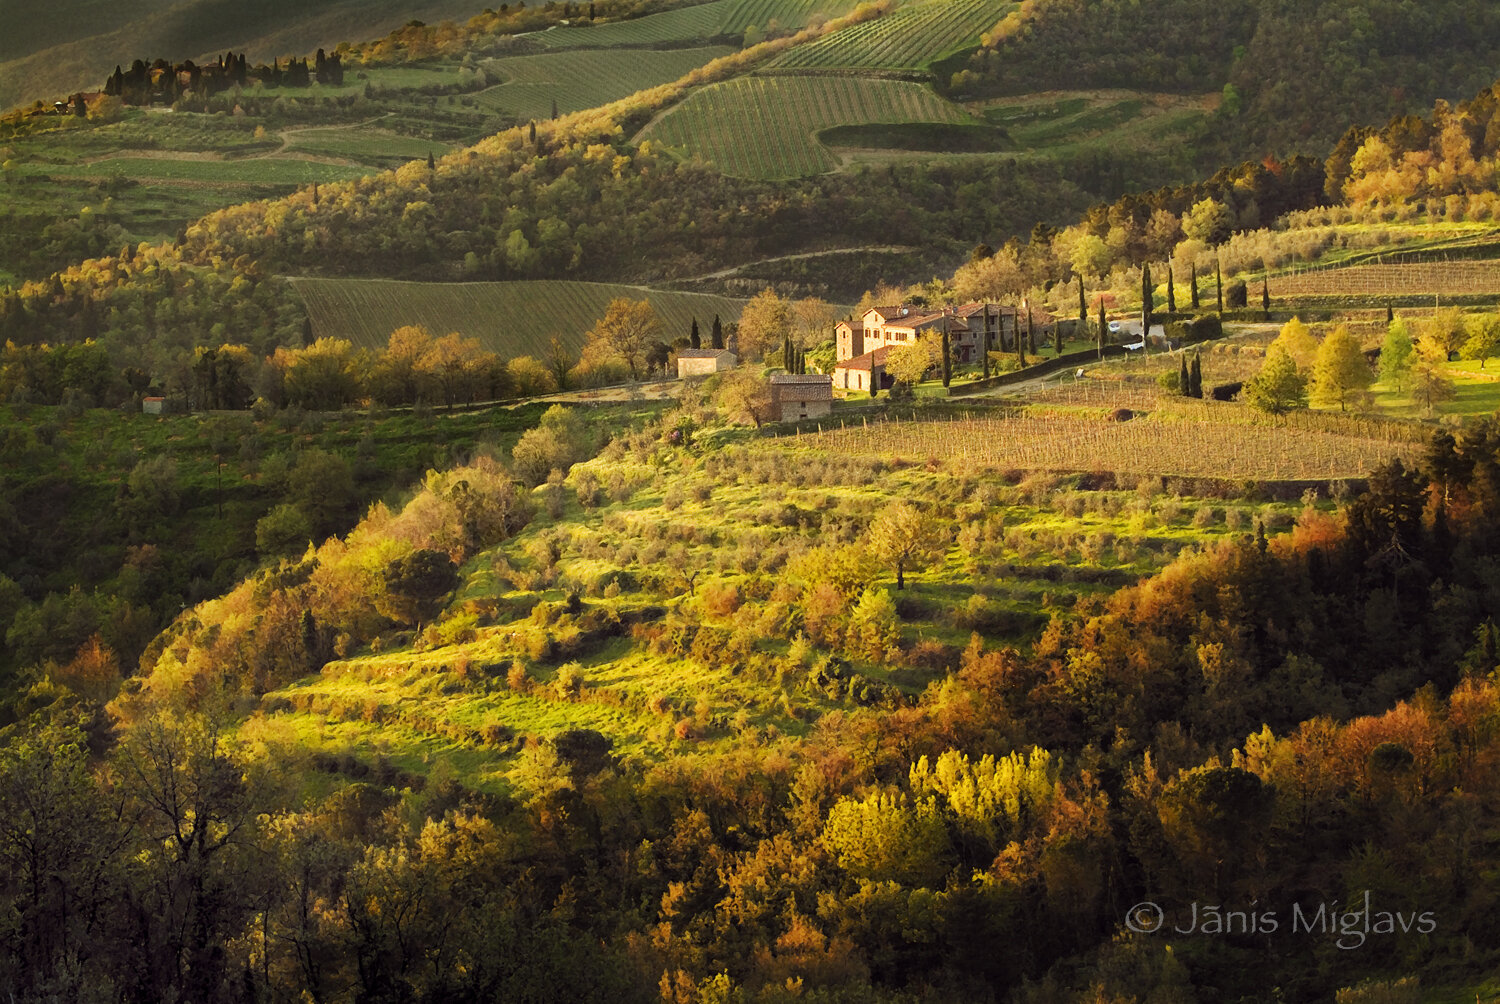 Sunlight splashes the stone buildings on hillside farm and vineyards in Tuscany, Italy.